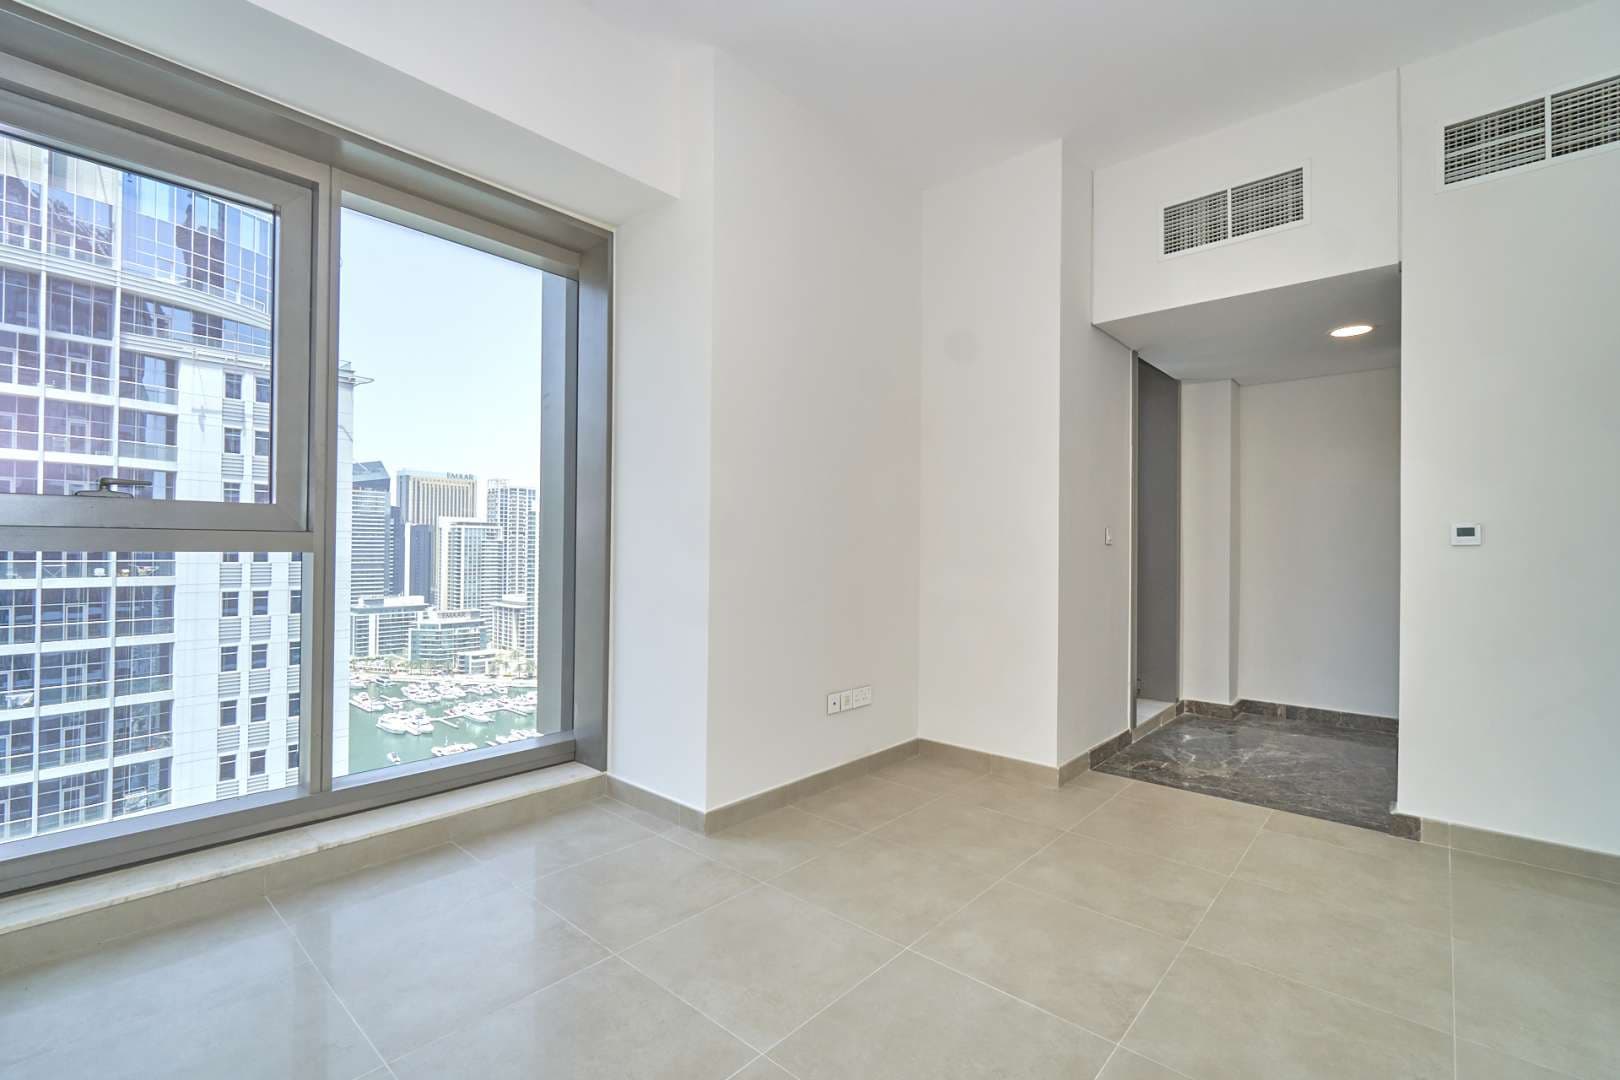 3 Bedroom Apartment For Rent Sparkle Towers Lp07208 2ee66866dcba2200.jpg